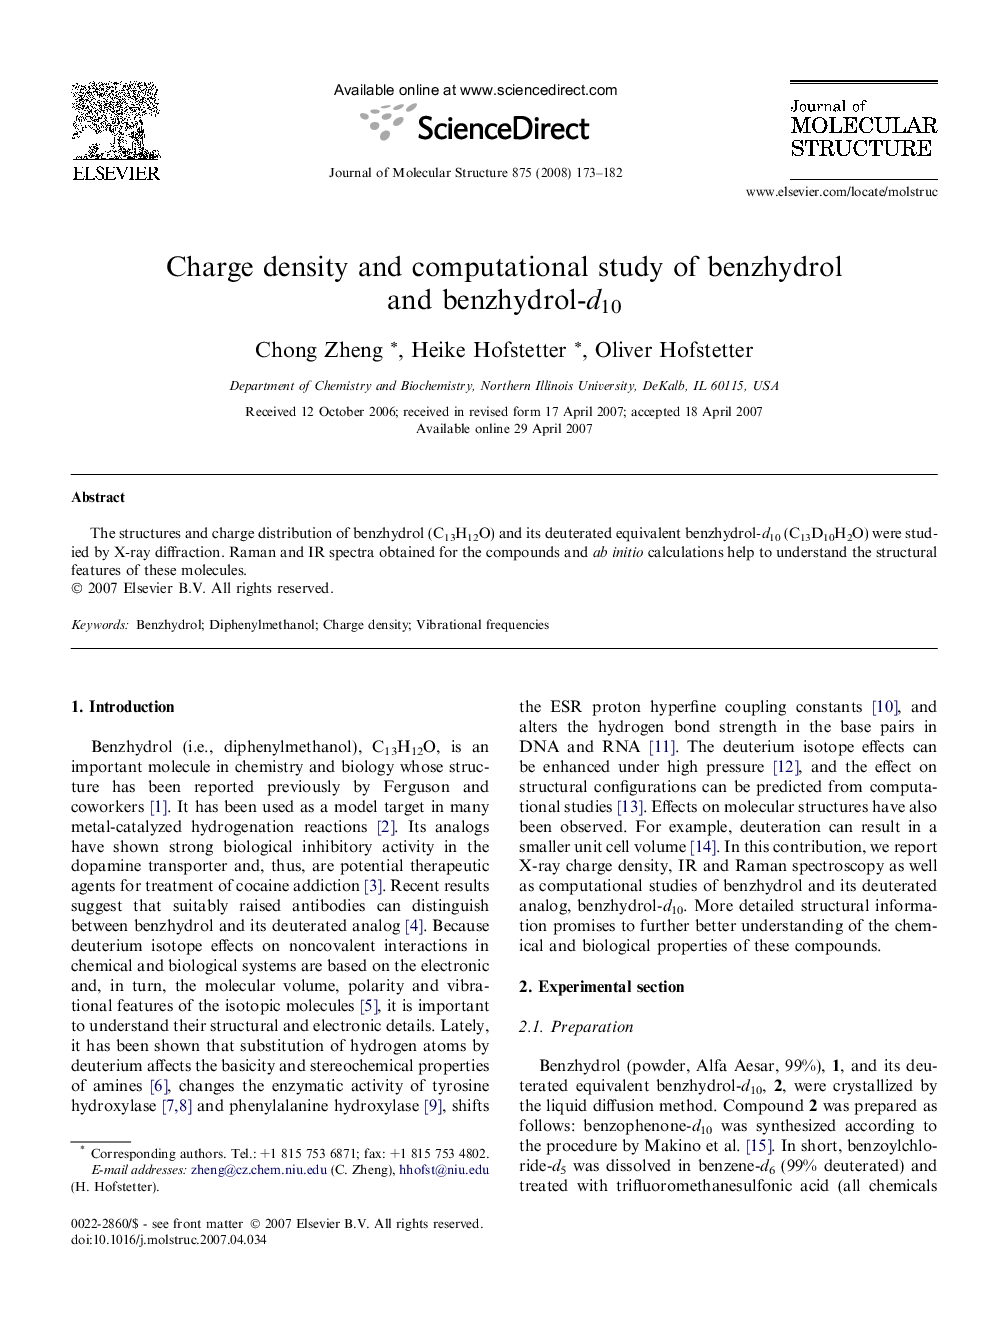 Charge density and computational study of benzhydrol and benzhydrol-d10